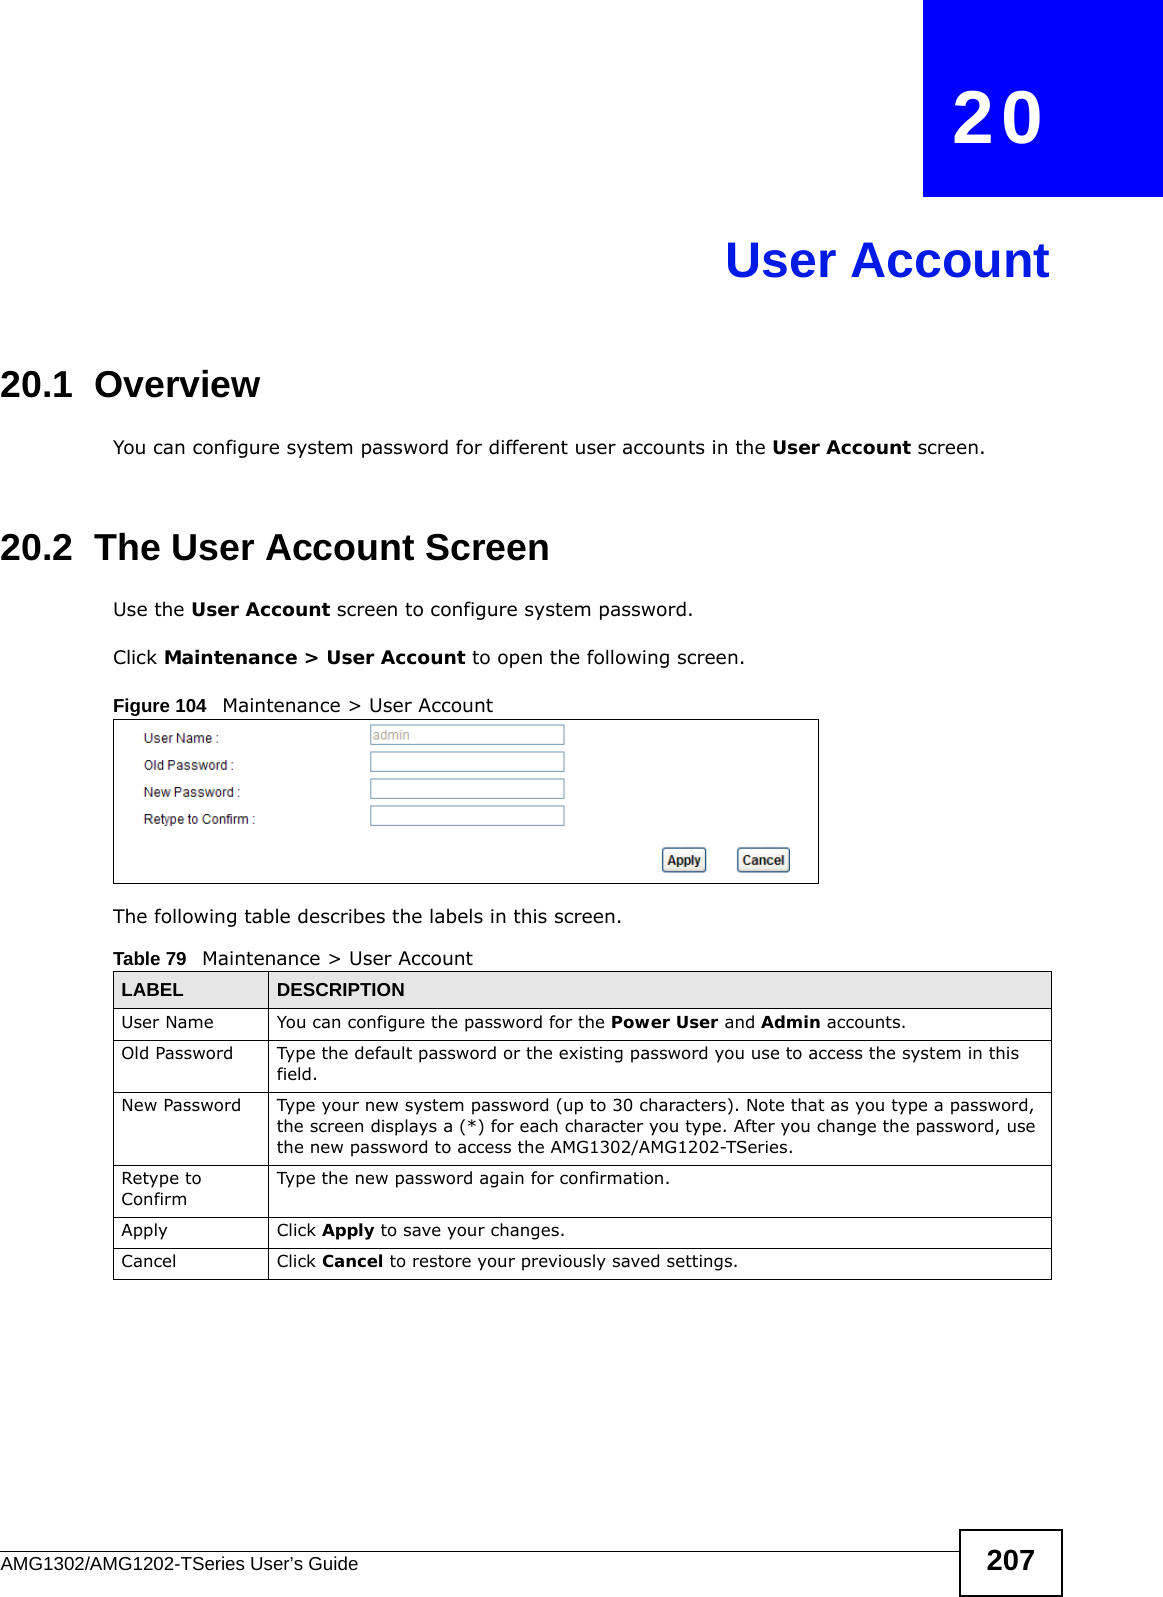 AMG1302/AMG1202-TSeries User’s Guide 207CHAPTER   20User Account20.1  Overview You can configure system password for different user accounts in the User Account screen.20.2  The User Account ScreenUse the User Account screen to configure system password.Click Maintenance &gt; User Account to open the following screen. Figure 104   Maintenance &gt; User AccountThe following table describes the labels in this screen. Table 79   Maintenance &gt; User AccountLABEL DESCRIPTIONUser Name You can configure the password for the Power User and Admin accounts.Old Password Type the default password or the existing password you use to access the system in this field.New Password Type your new system password (up to 30 characters). Note that as you type a password, the screen displays a (*) for each character you type. After you change the password, use the new password to access the AMG1302/AMG1202-TSeries.Retype to ConfirmType the new password again for confirmation.Apply Click Apply to save your changes.Cancel Click Cancel to restore your previously saved settings.